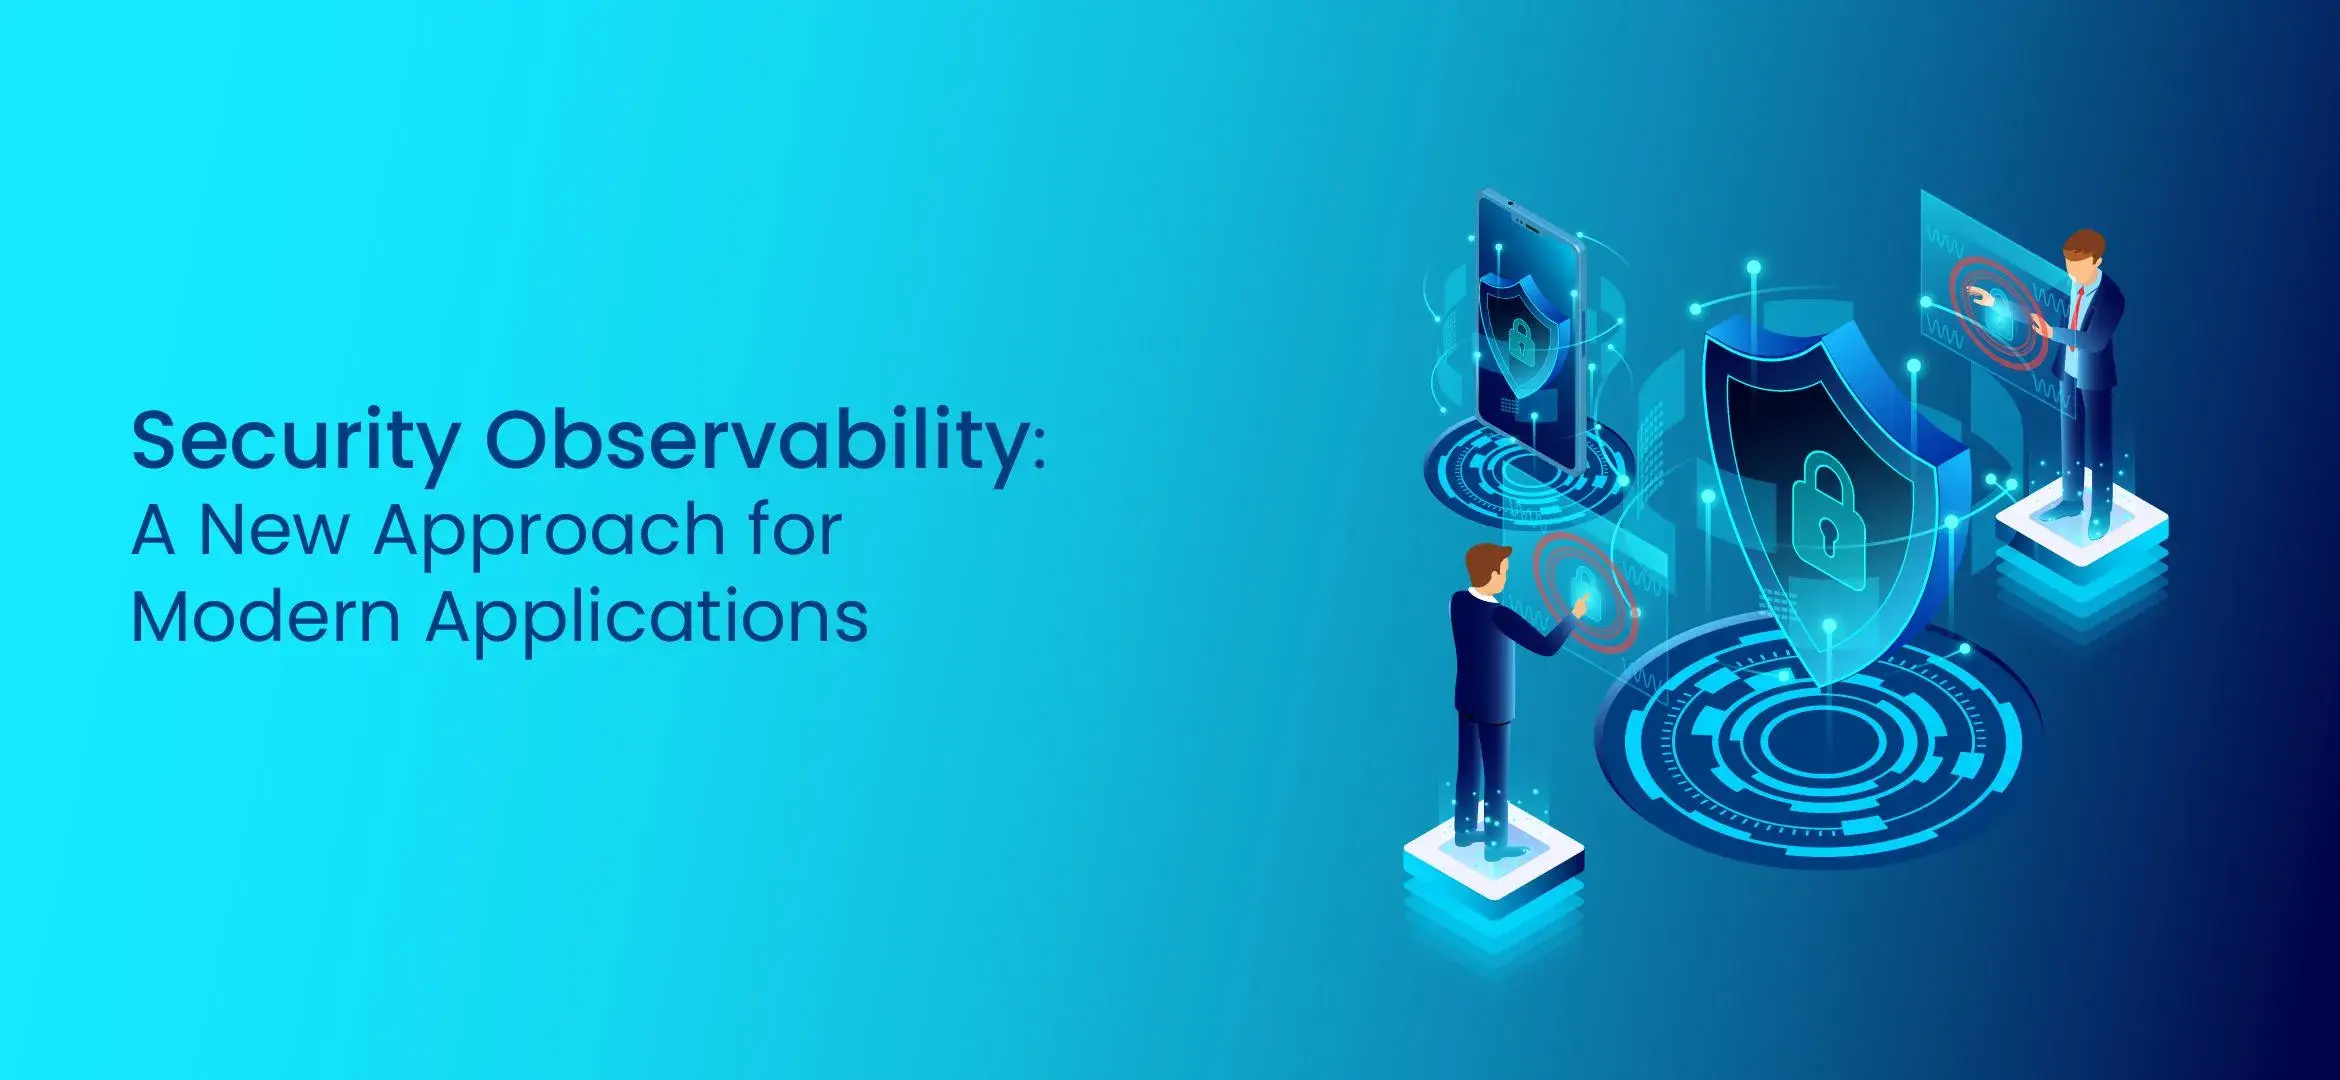 Security Observability: A New Approach for Modern Applications